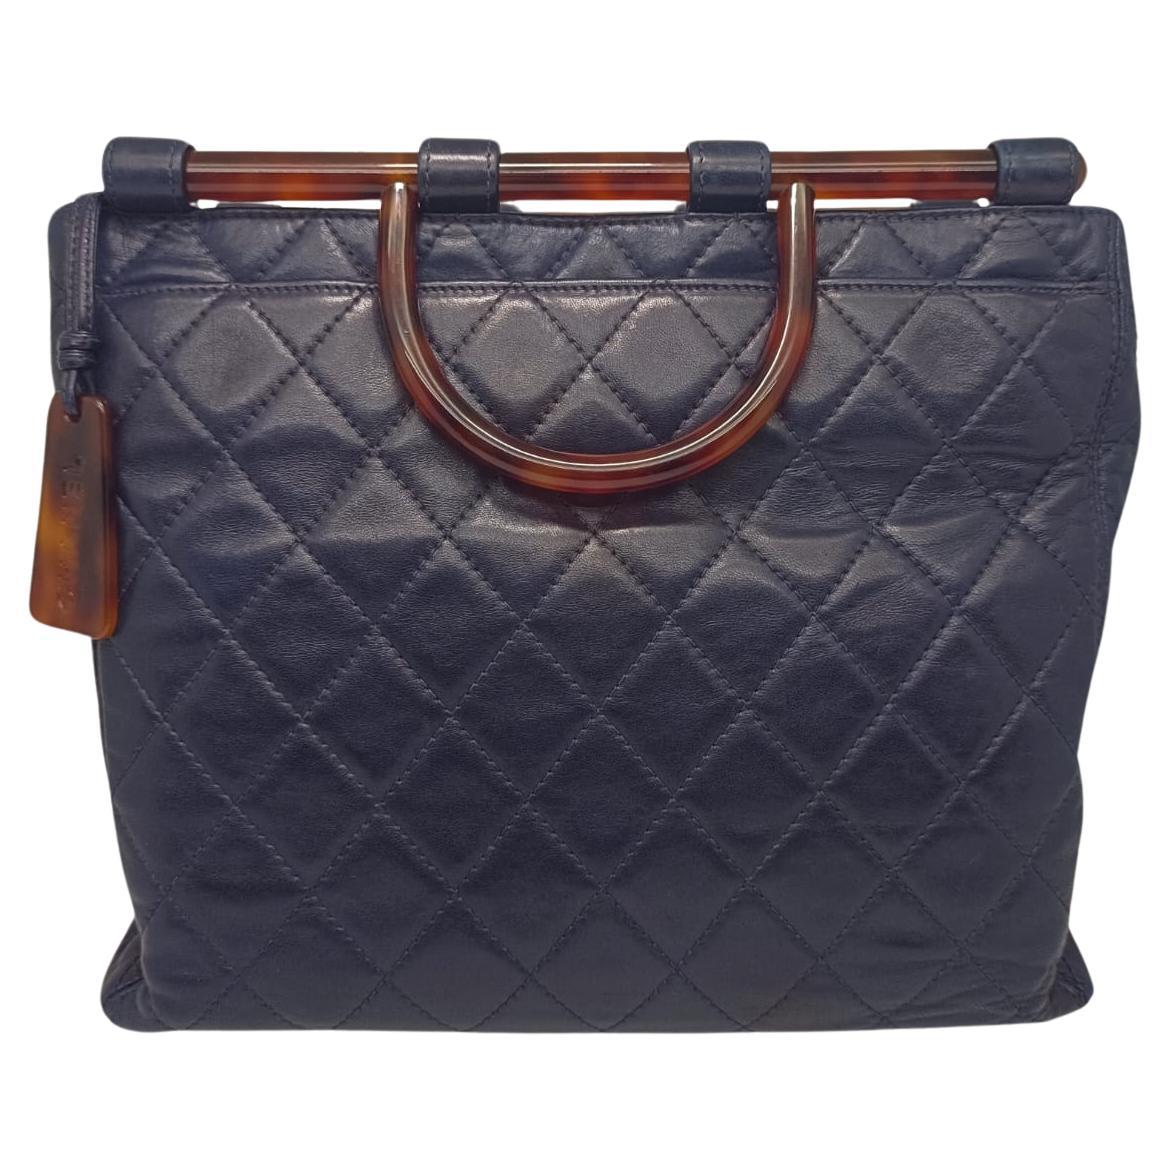 Vintage Chanel Navy Lambskin Quilted Tote with Tortoiseshell Handles For Sale